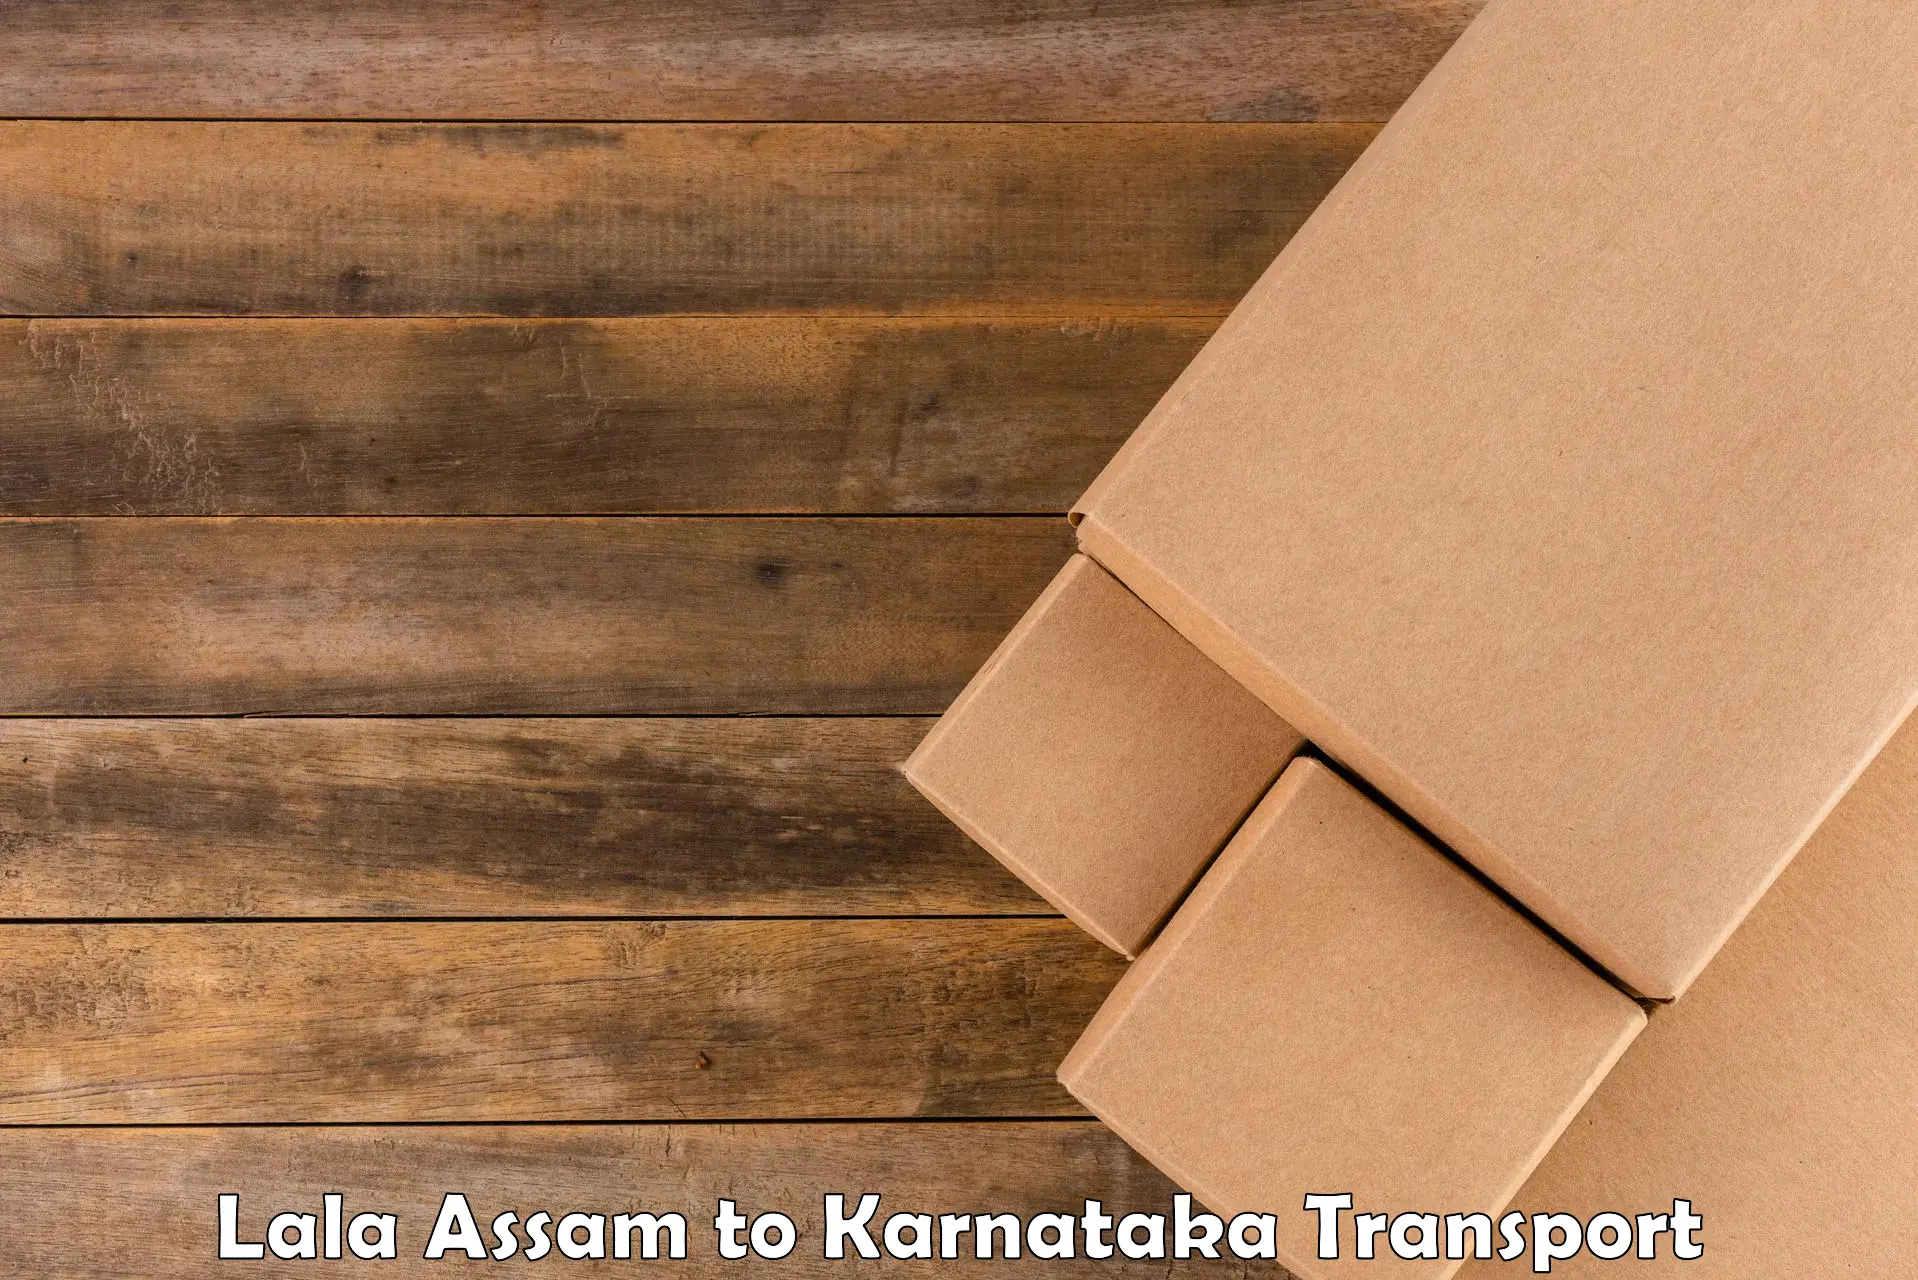 Vehicle transport services in Lala Assam to Malavalli